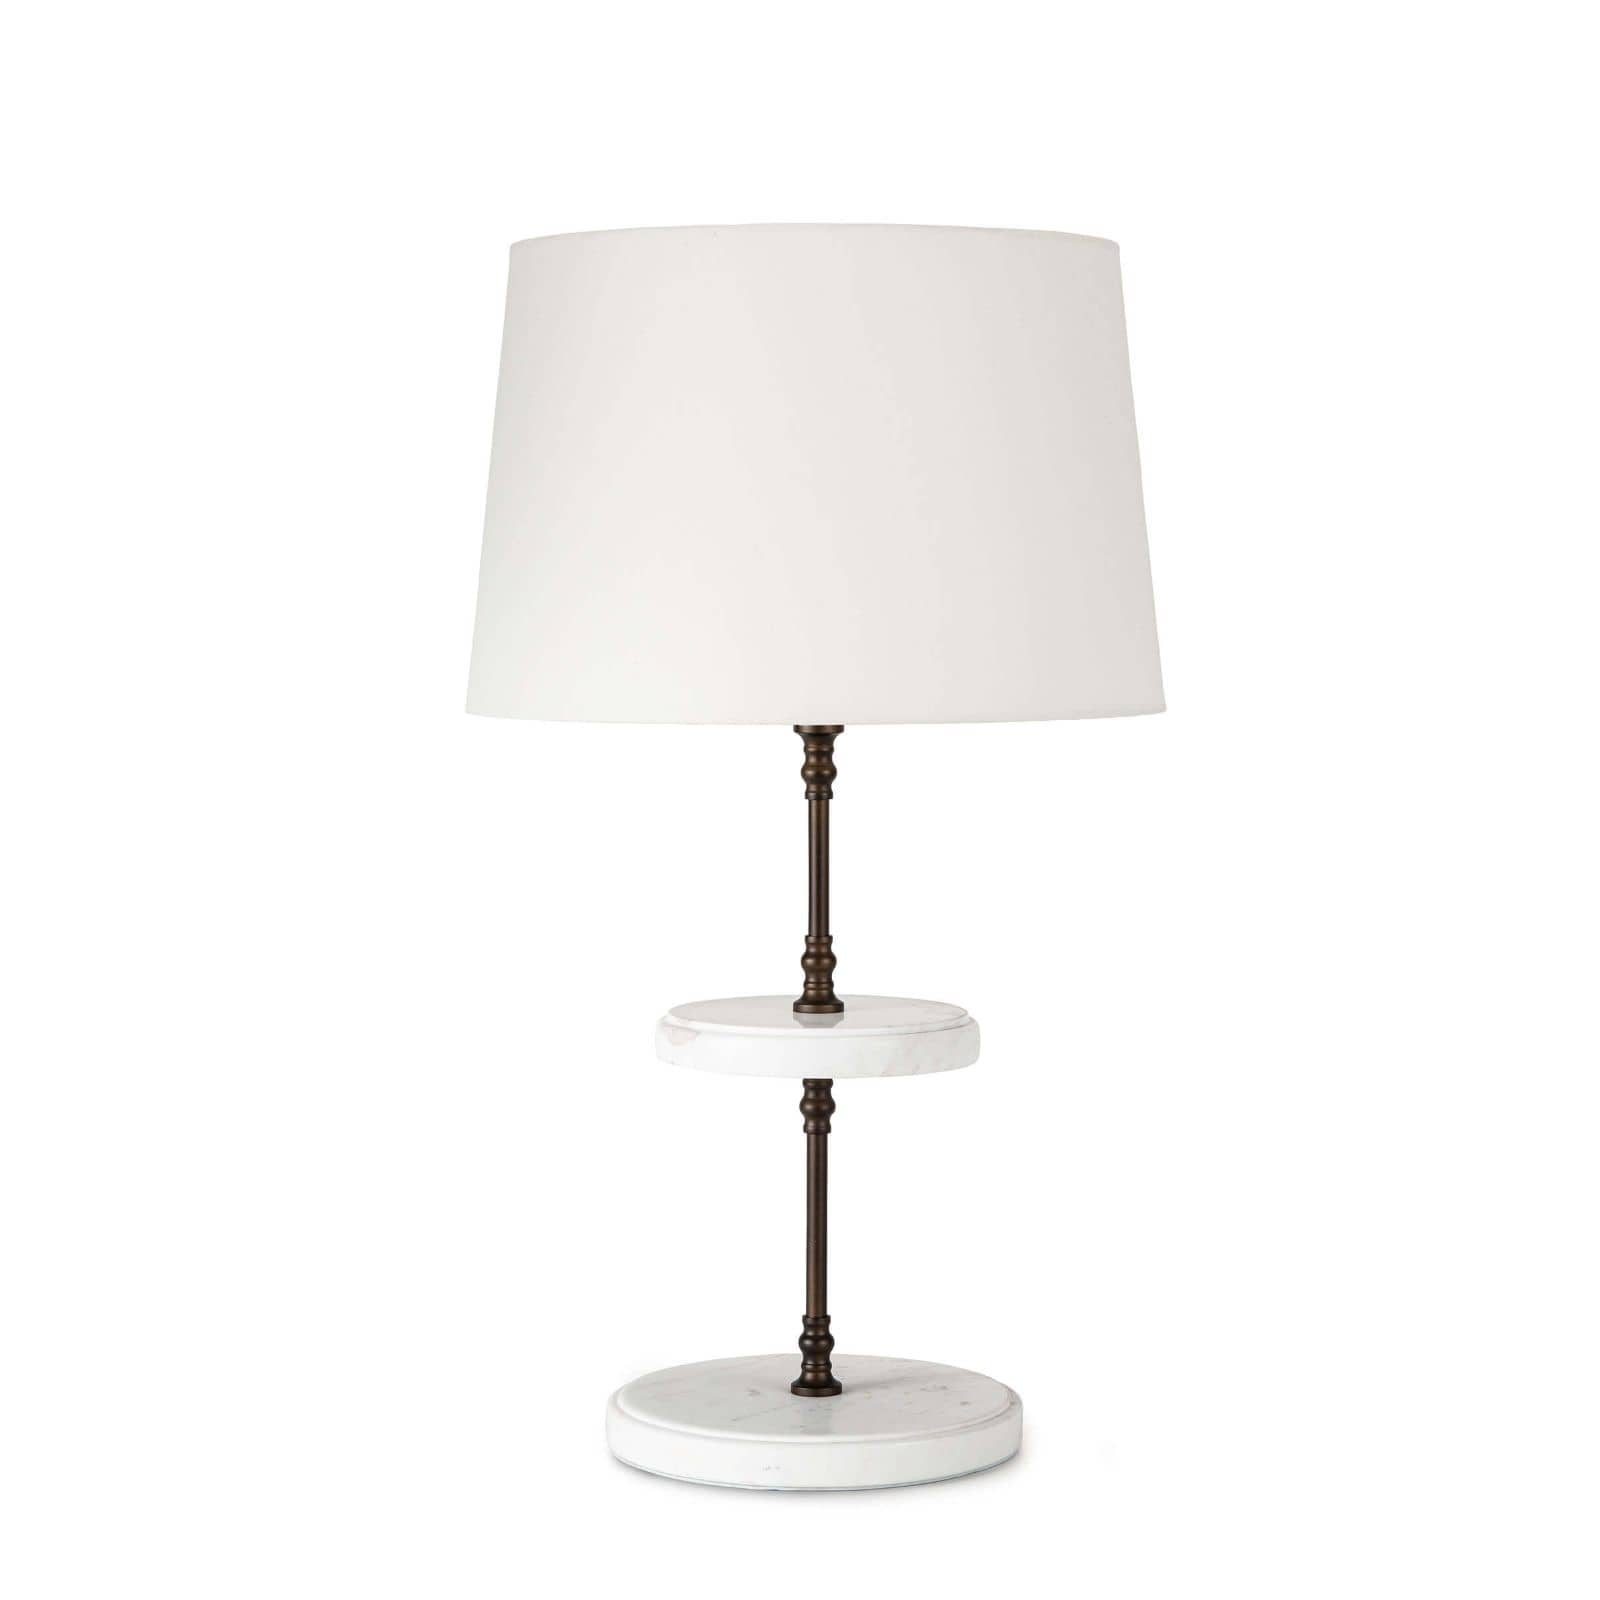 Bistro Table Lamp in Oil Rubbed Bronze by Coastal Living